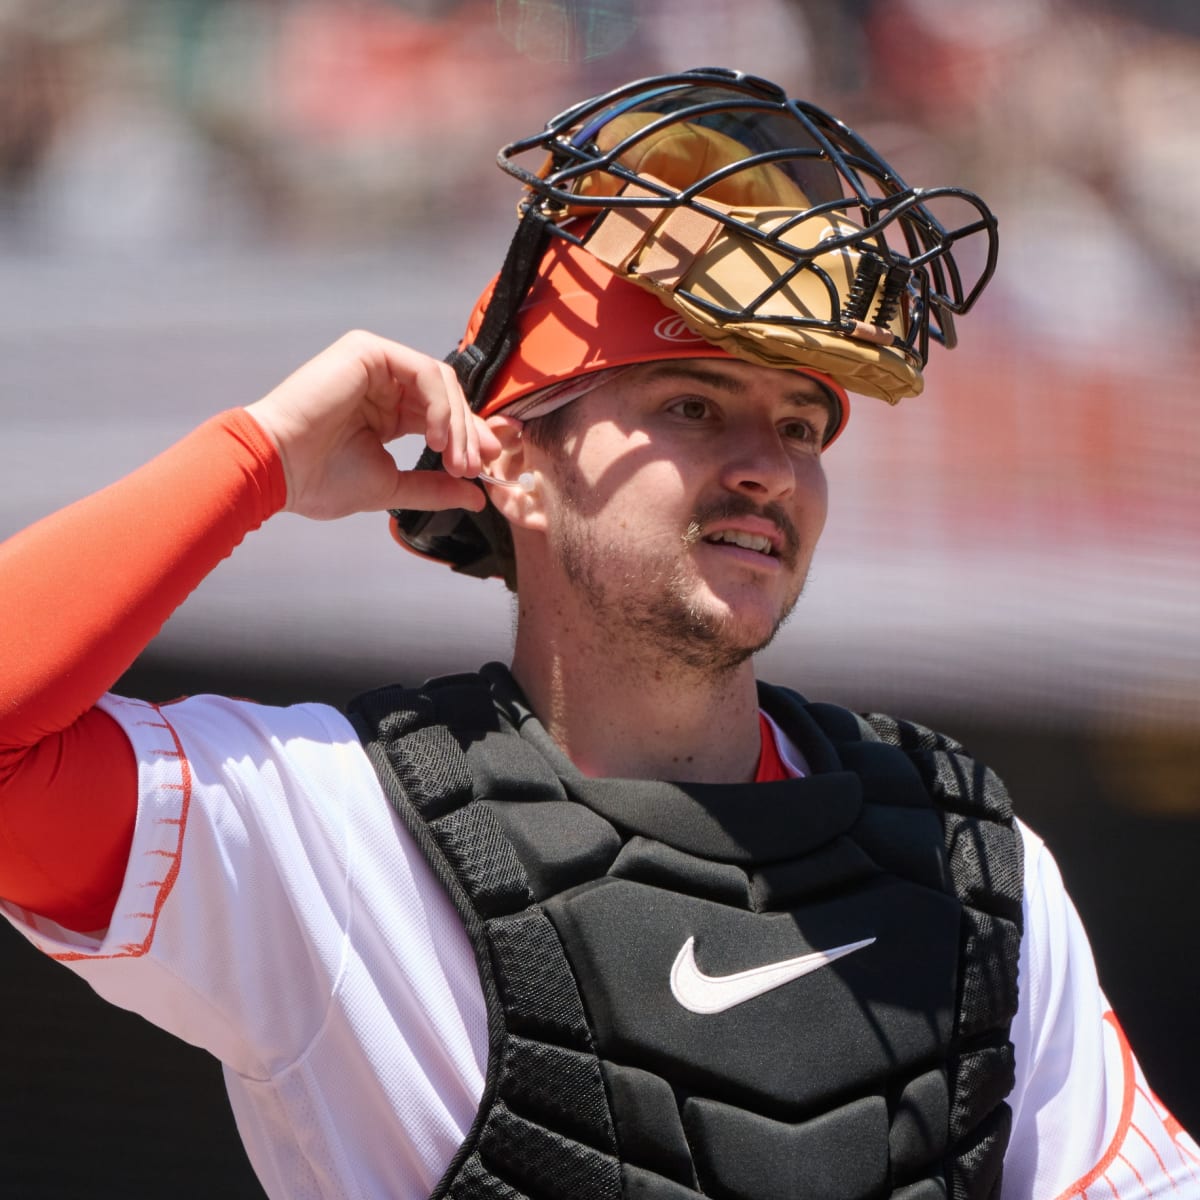 SF Giants catcher Patrick Bailey records MLB's fastest pop time